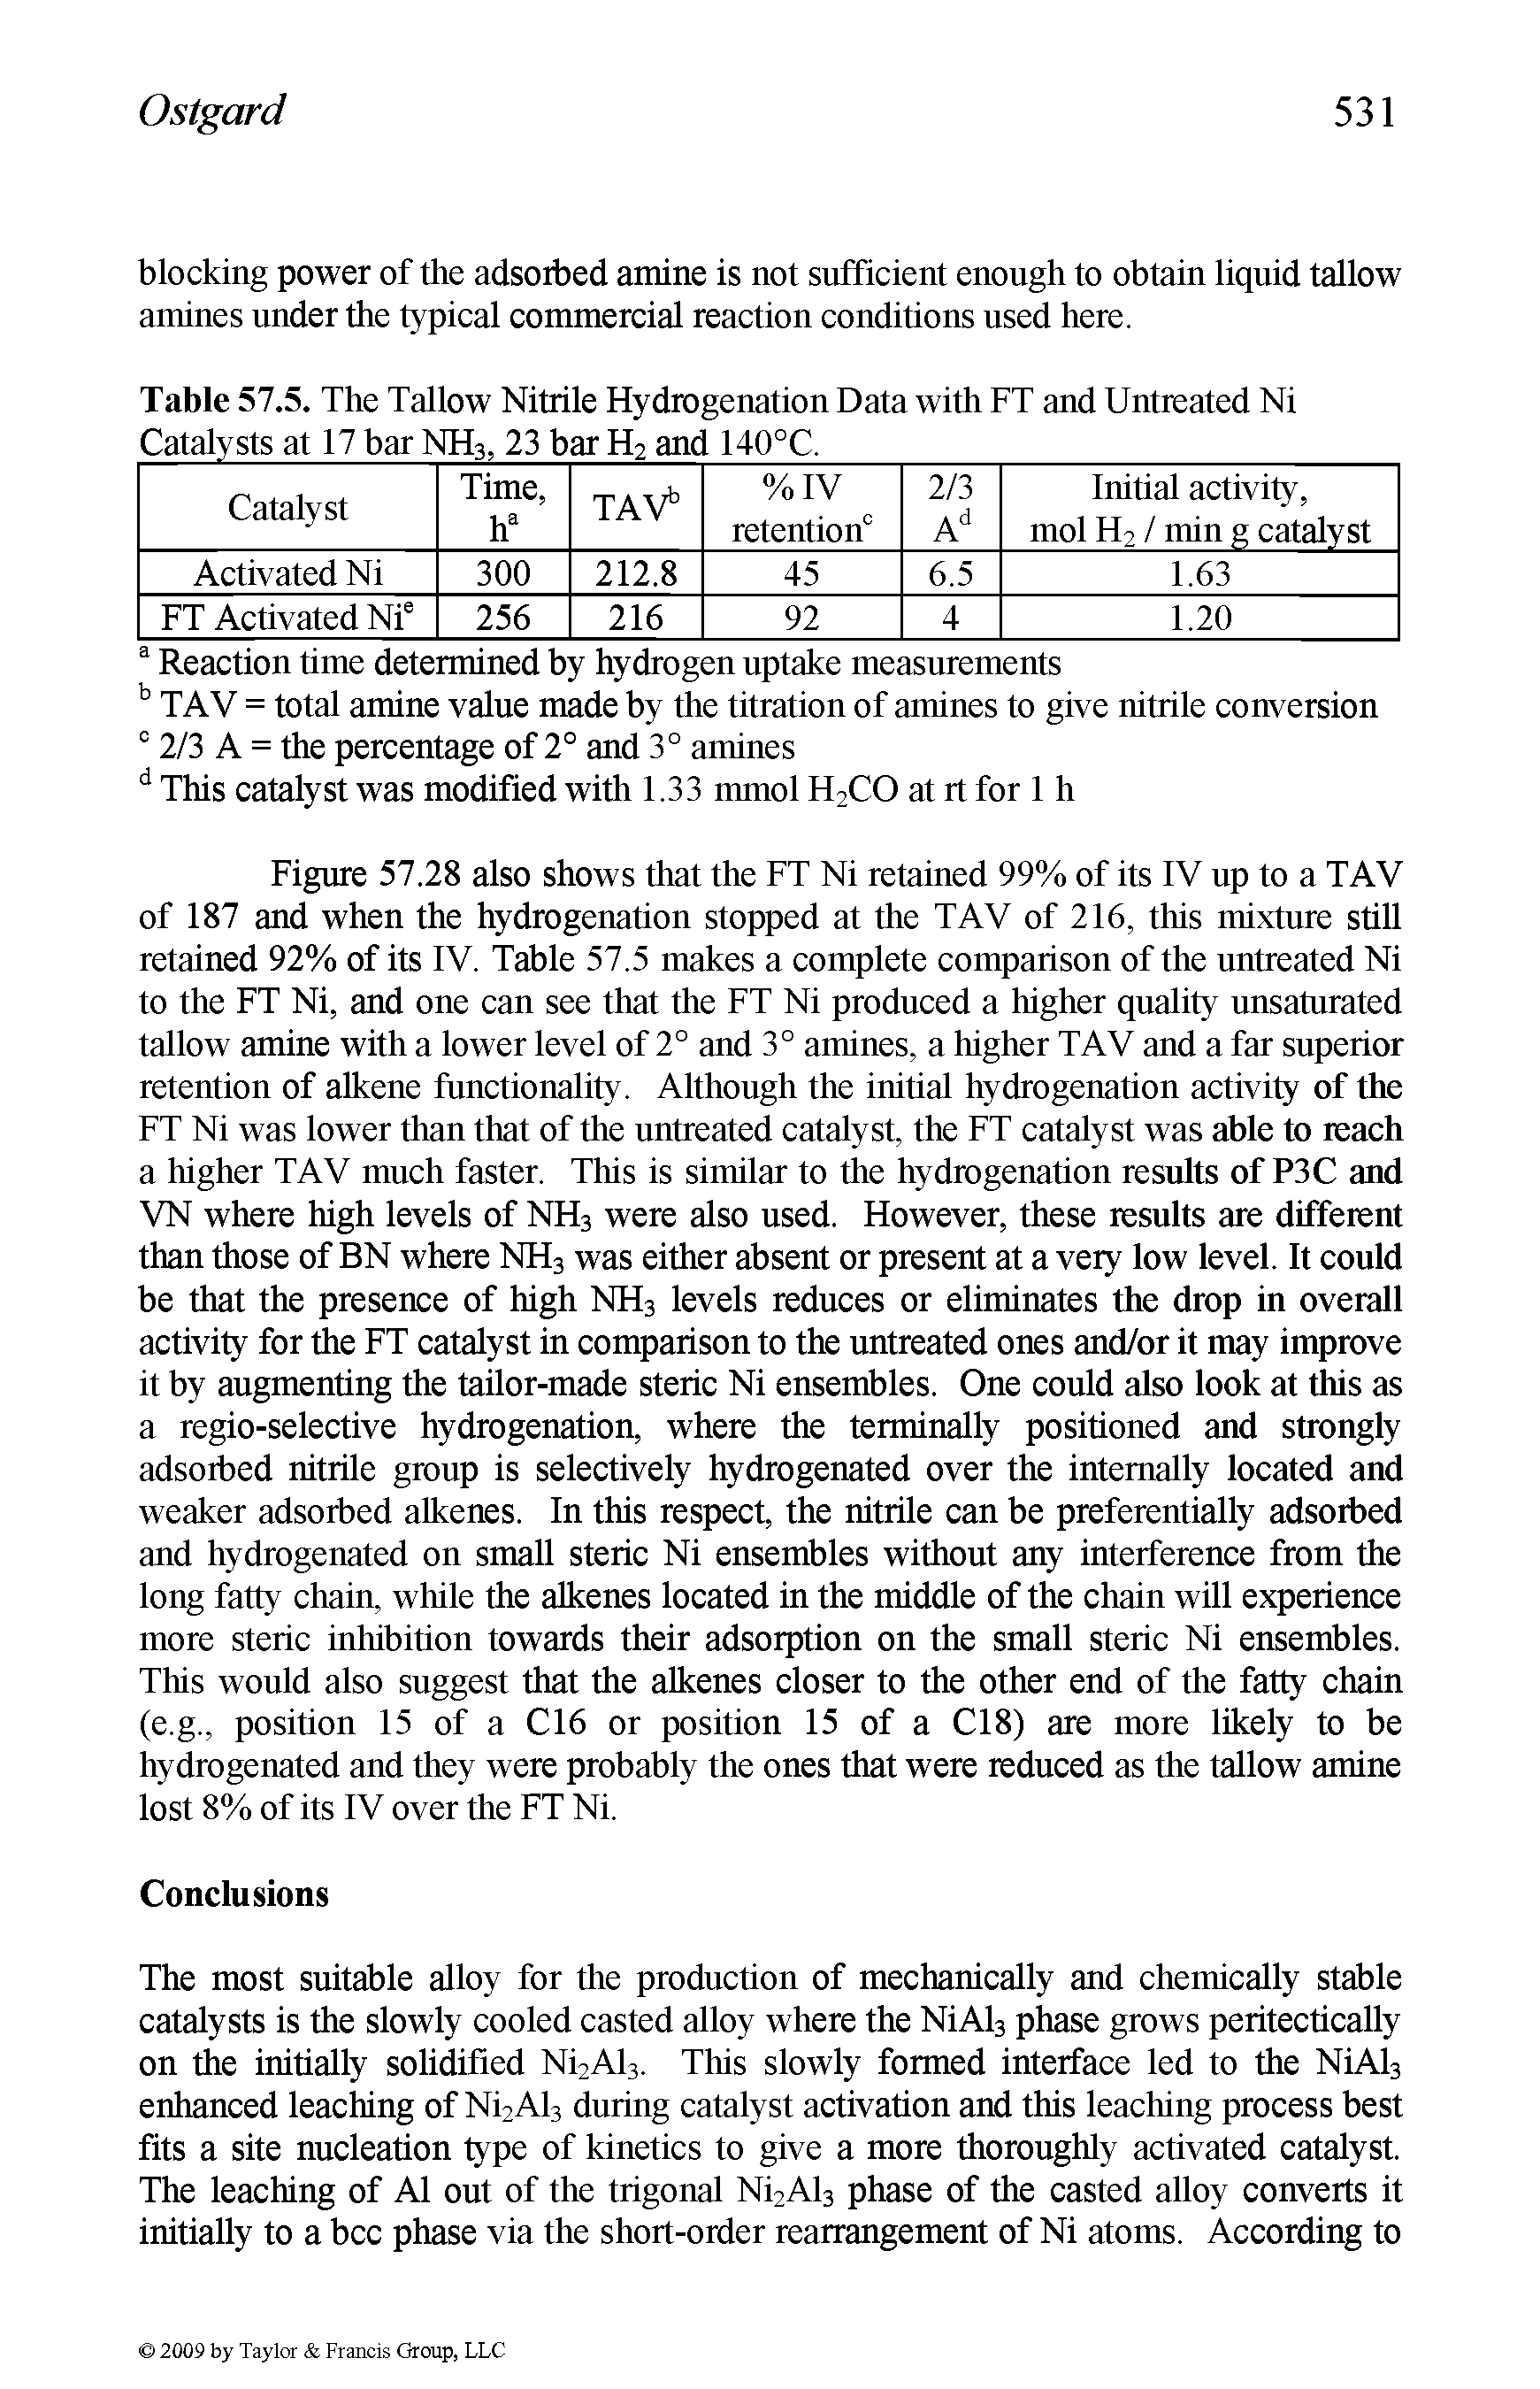 Table 57.5. The Tallow Nitrile Hydrogenation Data with FT and Untreated Ni Catalysts at 17 bar NH3, 23 bar H2 and 140°C.